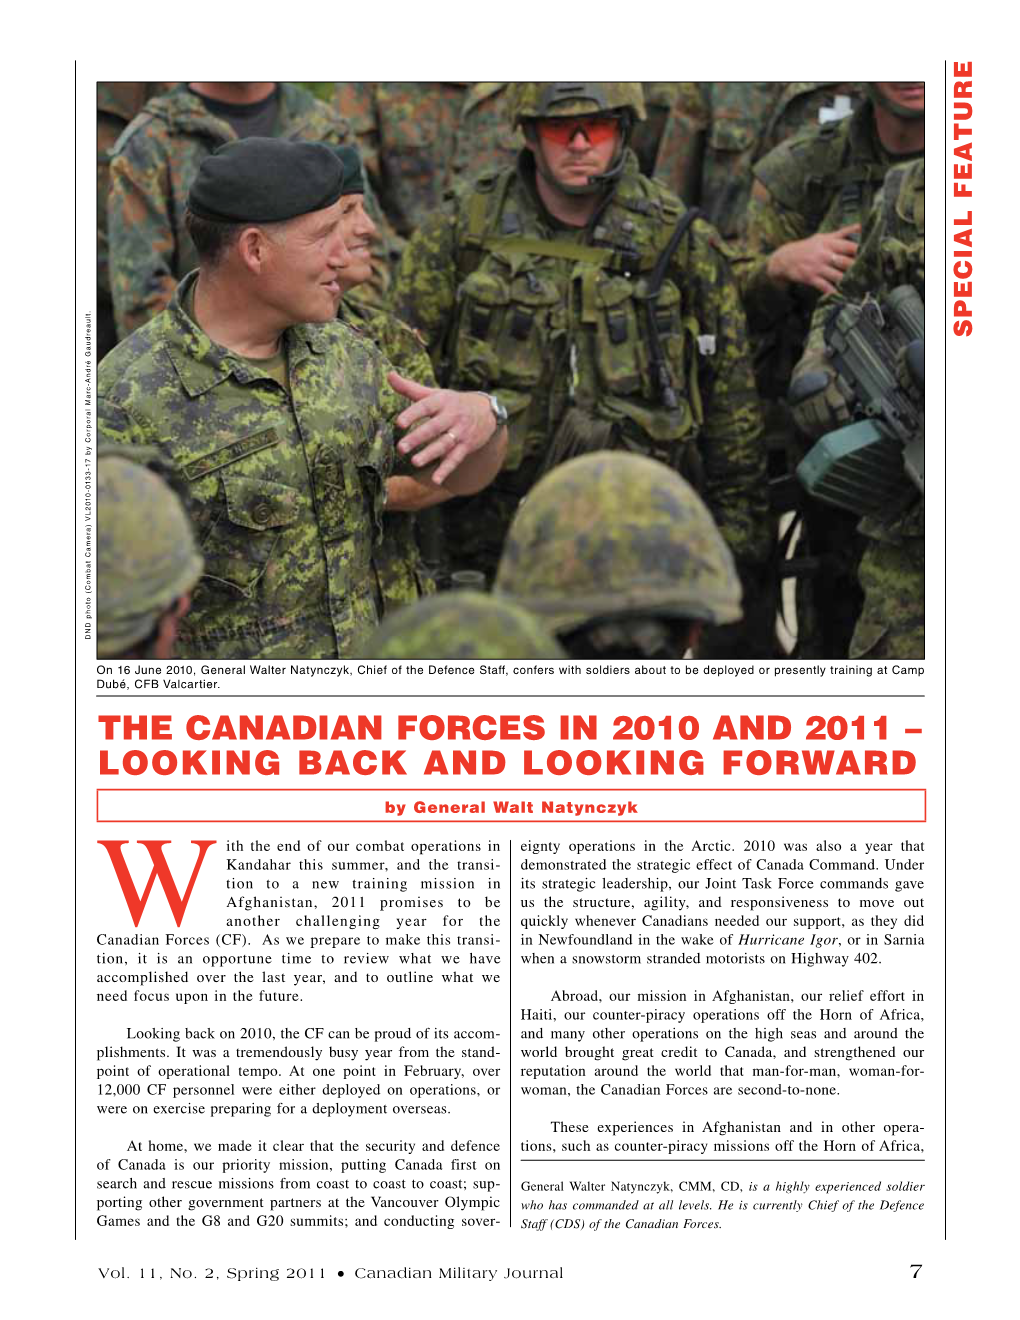 The Canadian Forces in 2010 and 2011 – Looking Back and Looking Forward